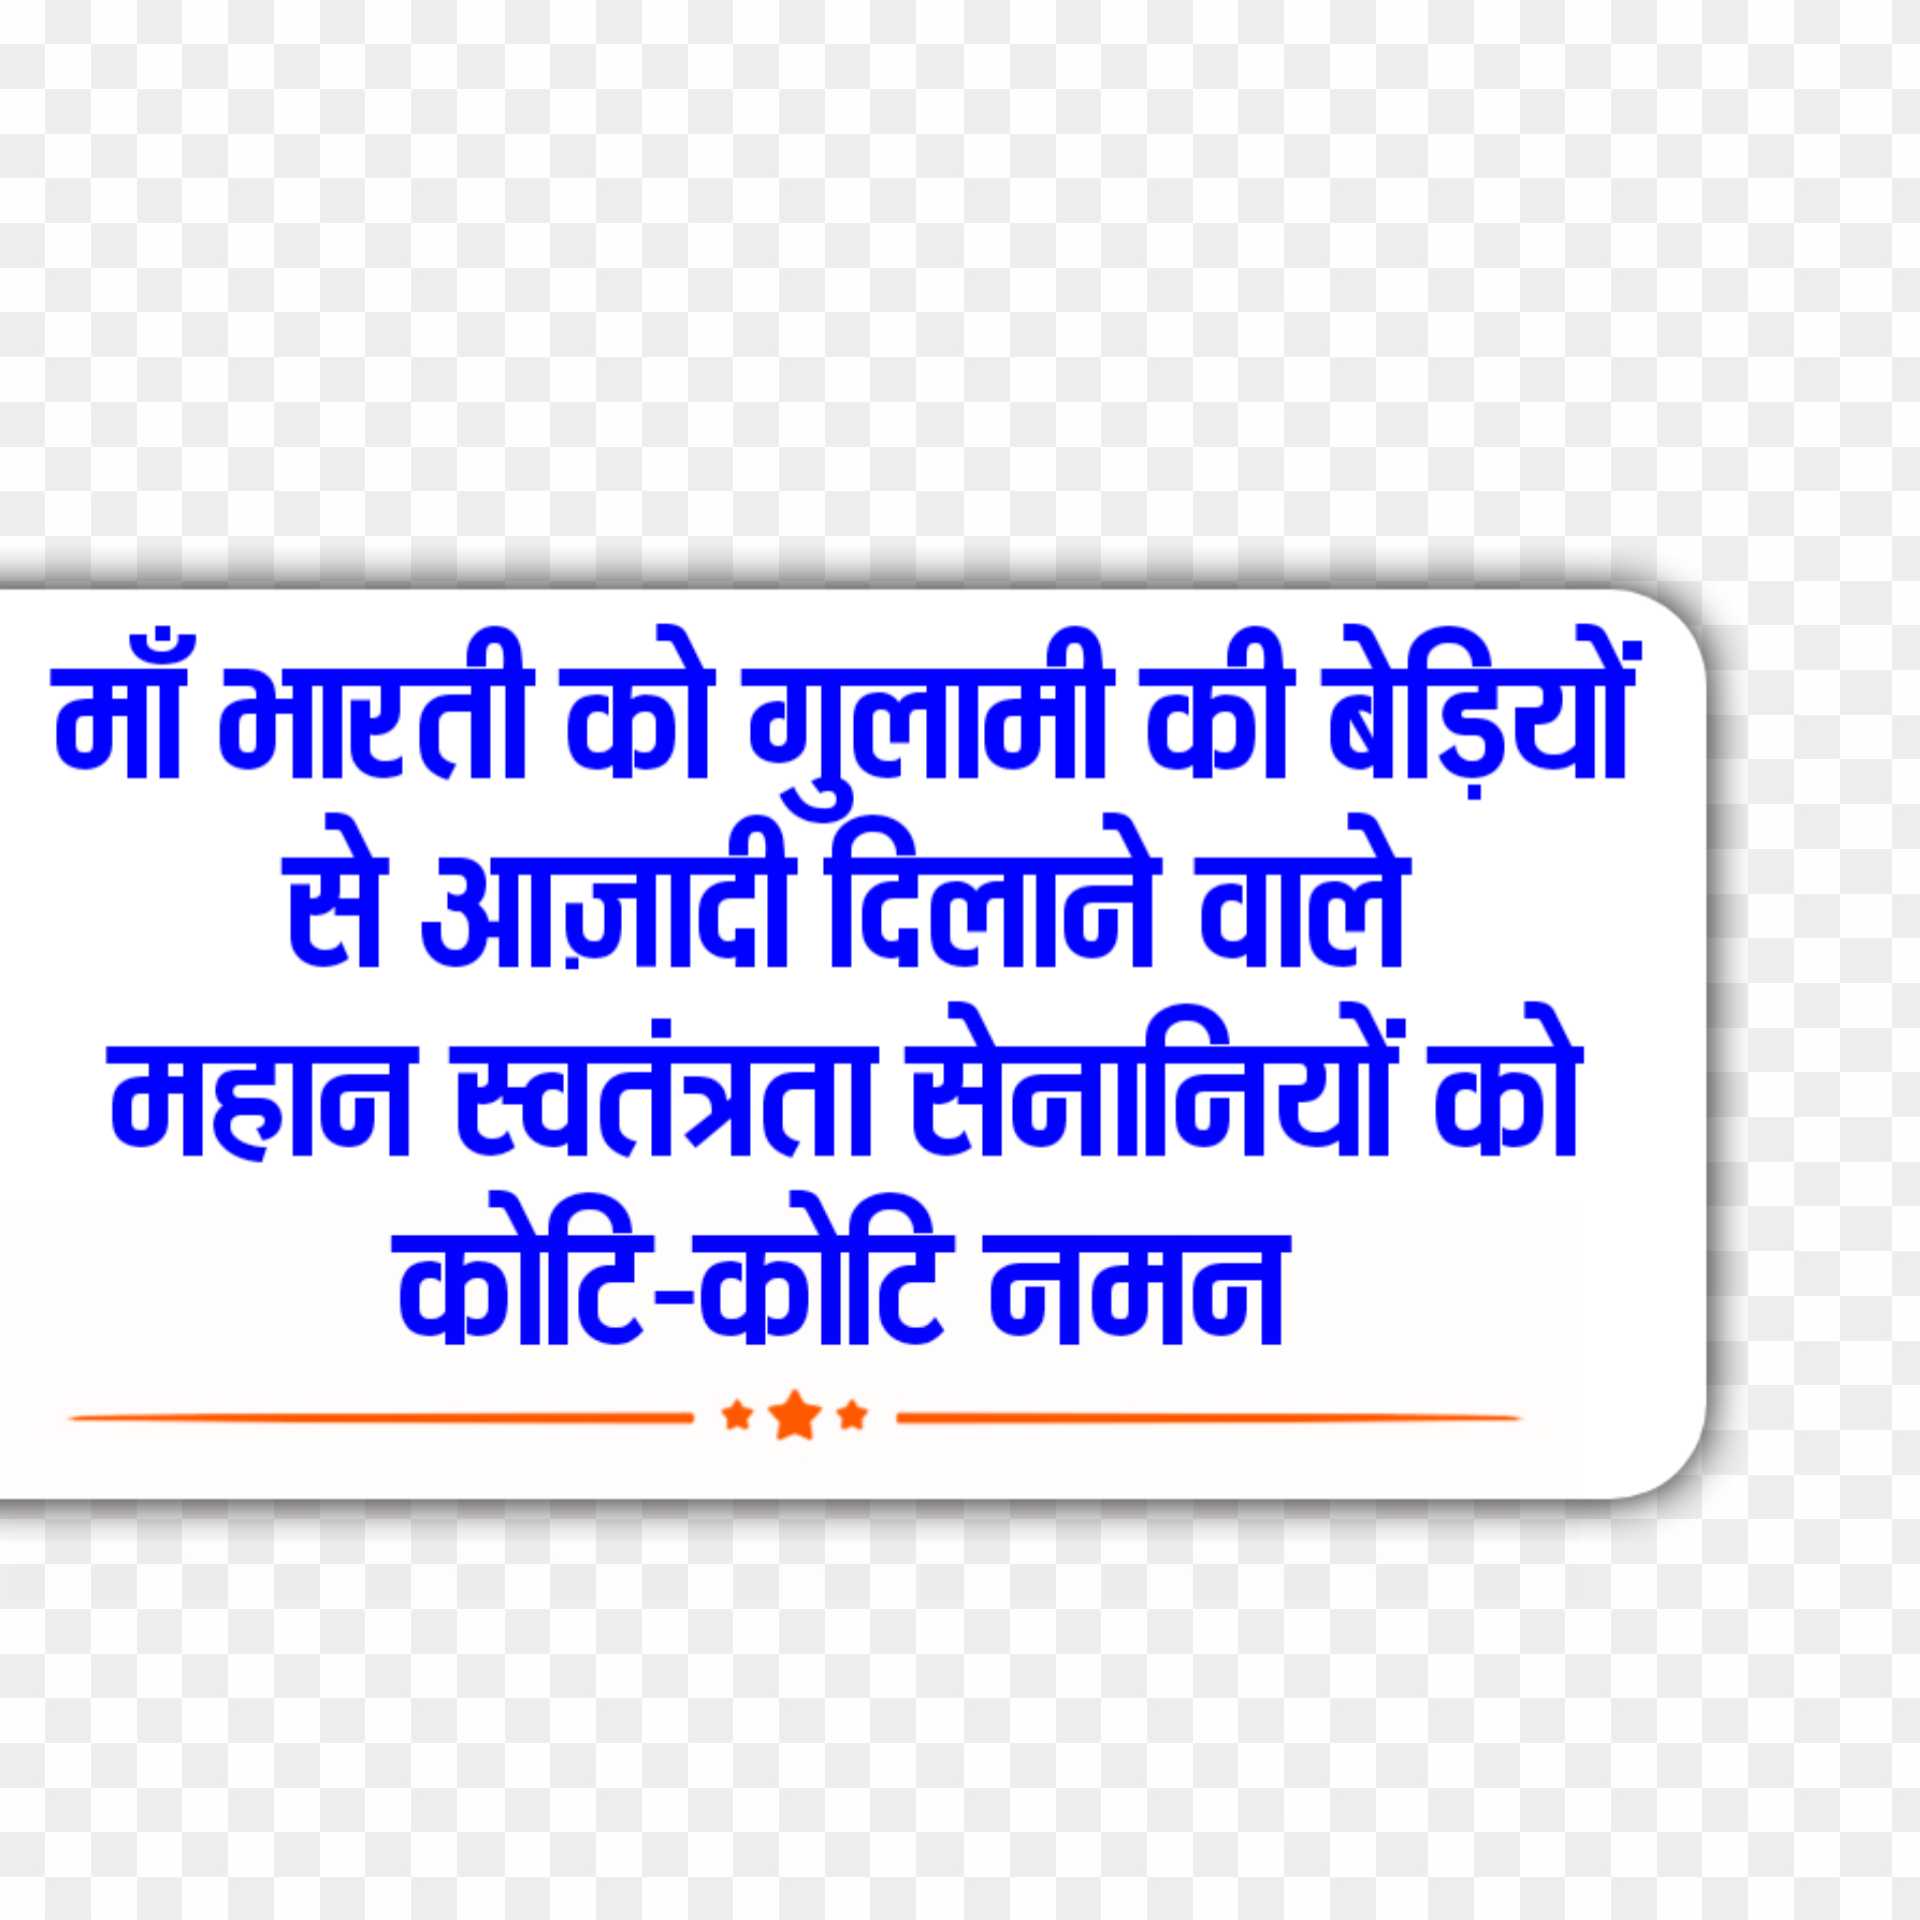 15 August quotes in Hindi text png images 